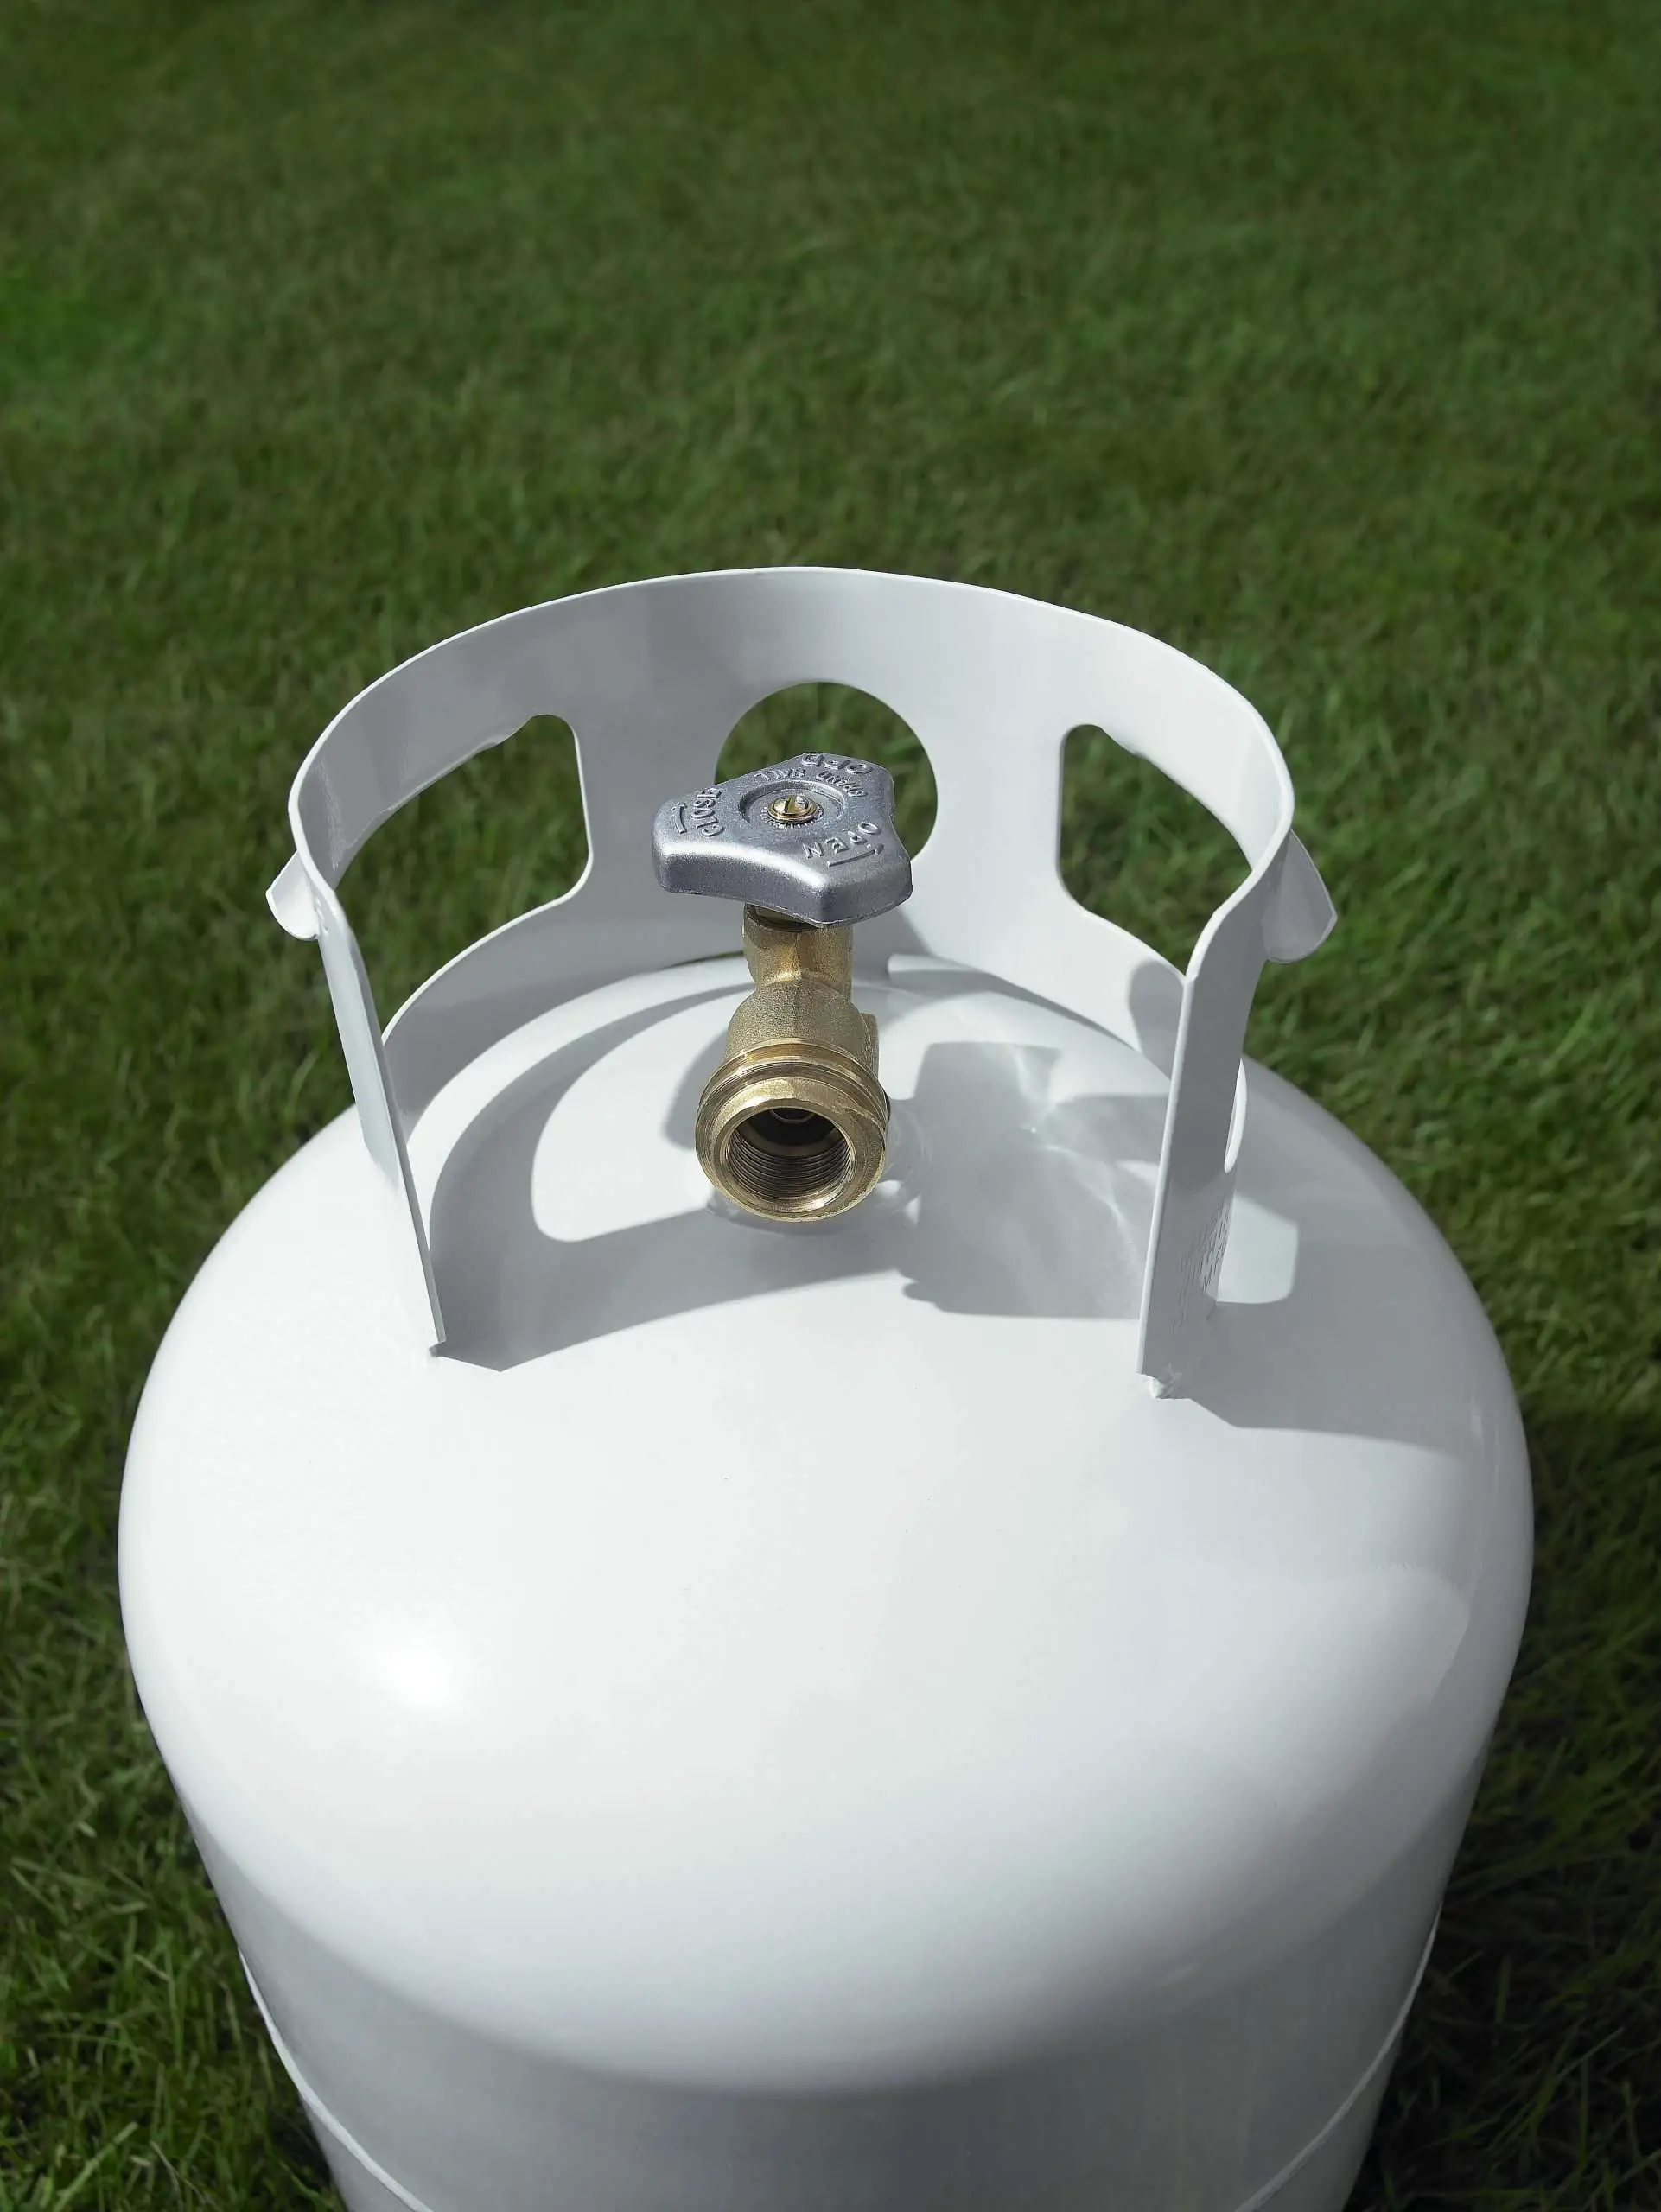 Is it Better to Exchange or Refill Your Propane Tank?